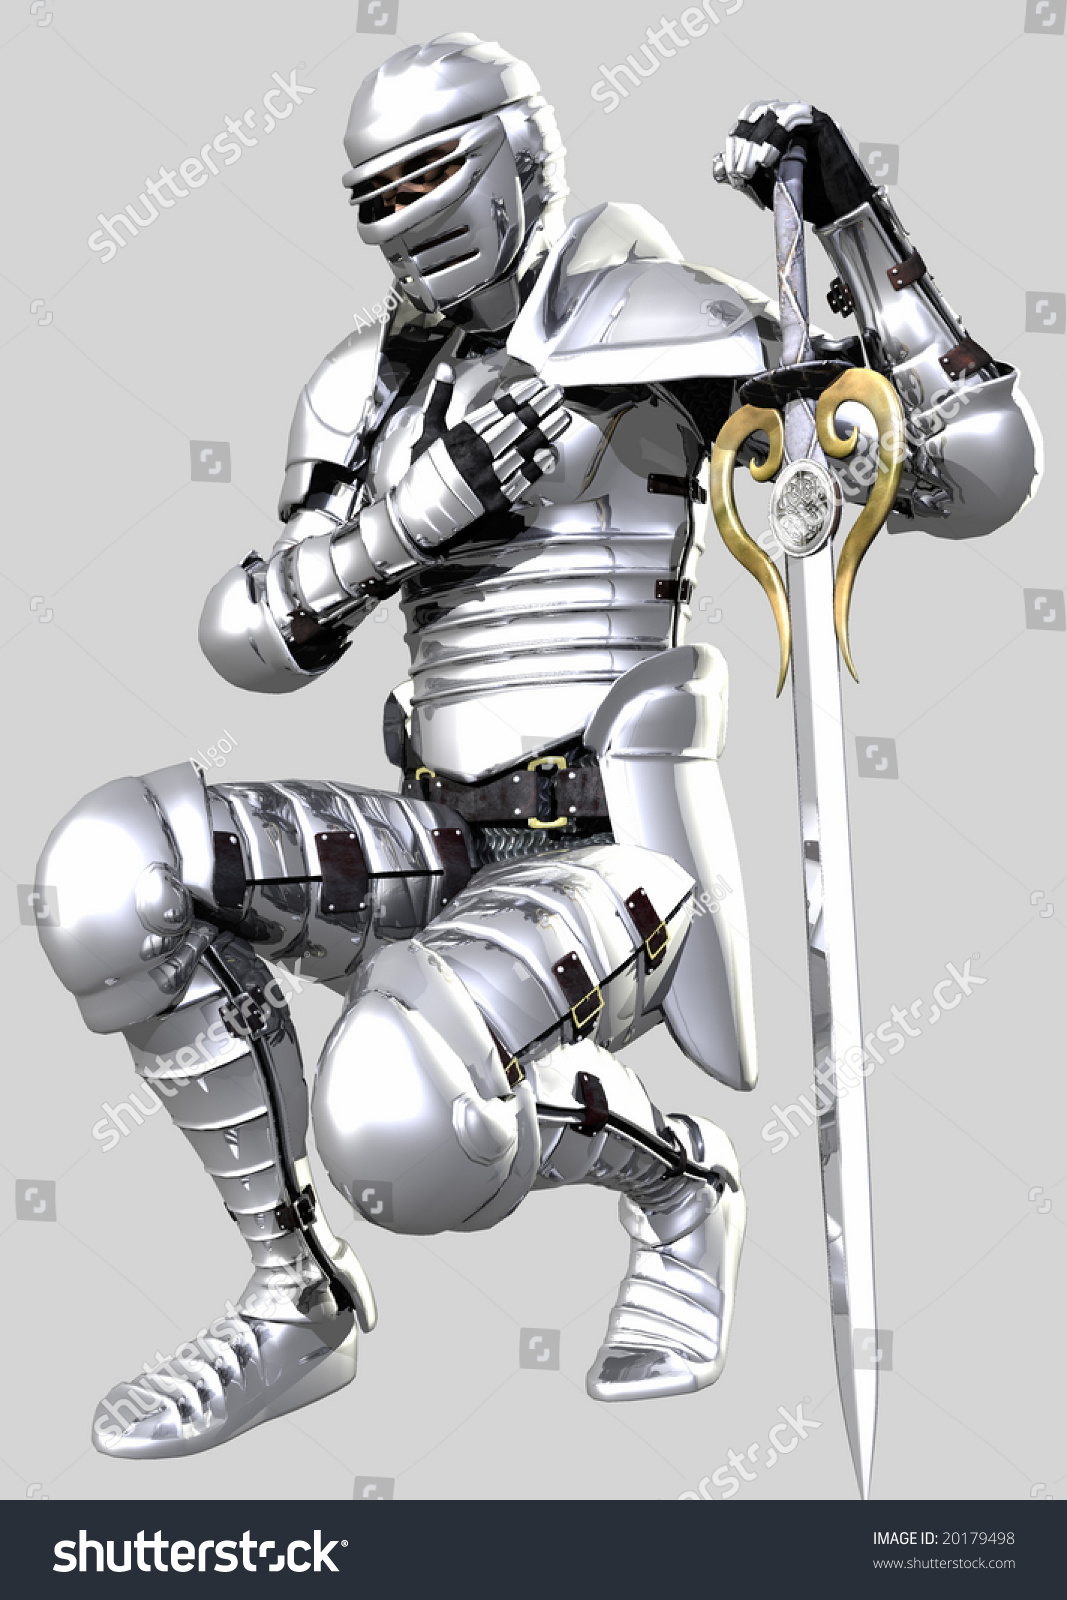 stock-photo-knight-in-shining-armour-on-grey-background-20179498.jpg